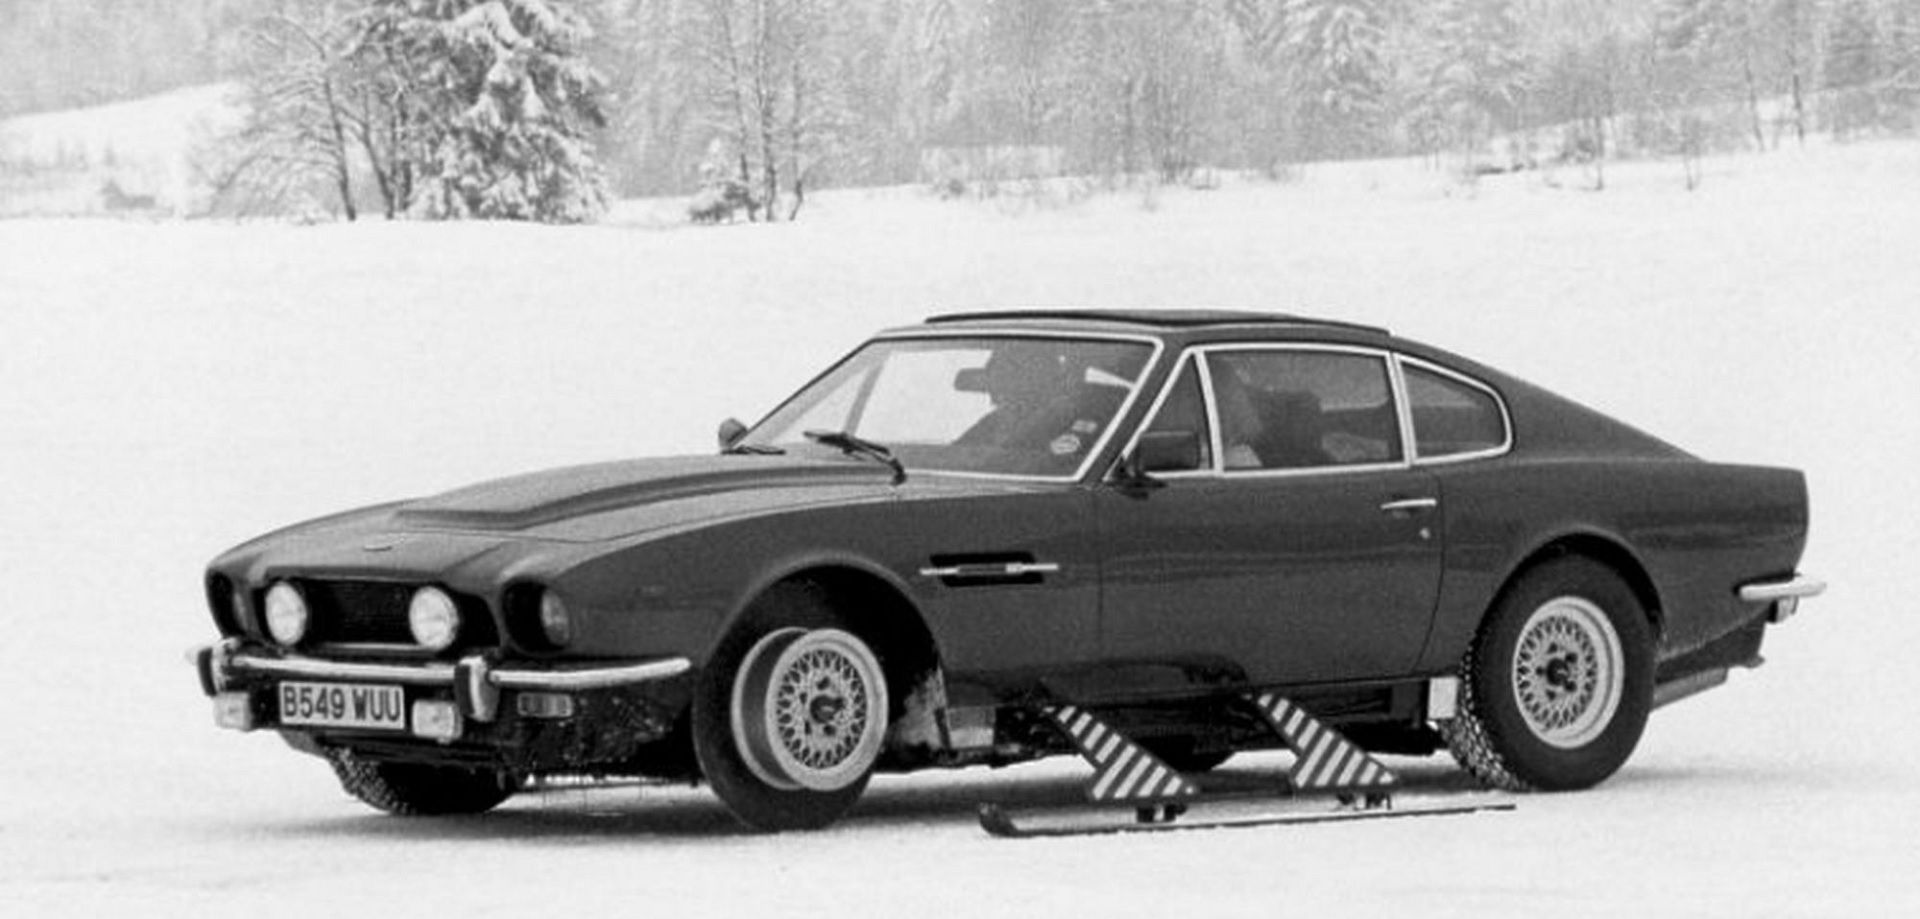 Best Bond Cars The Best Cars From The Films image 14